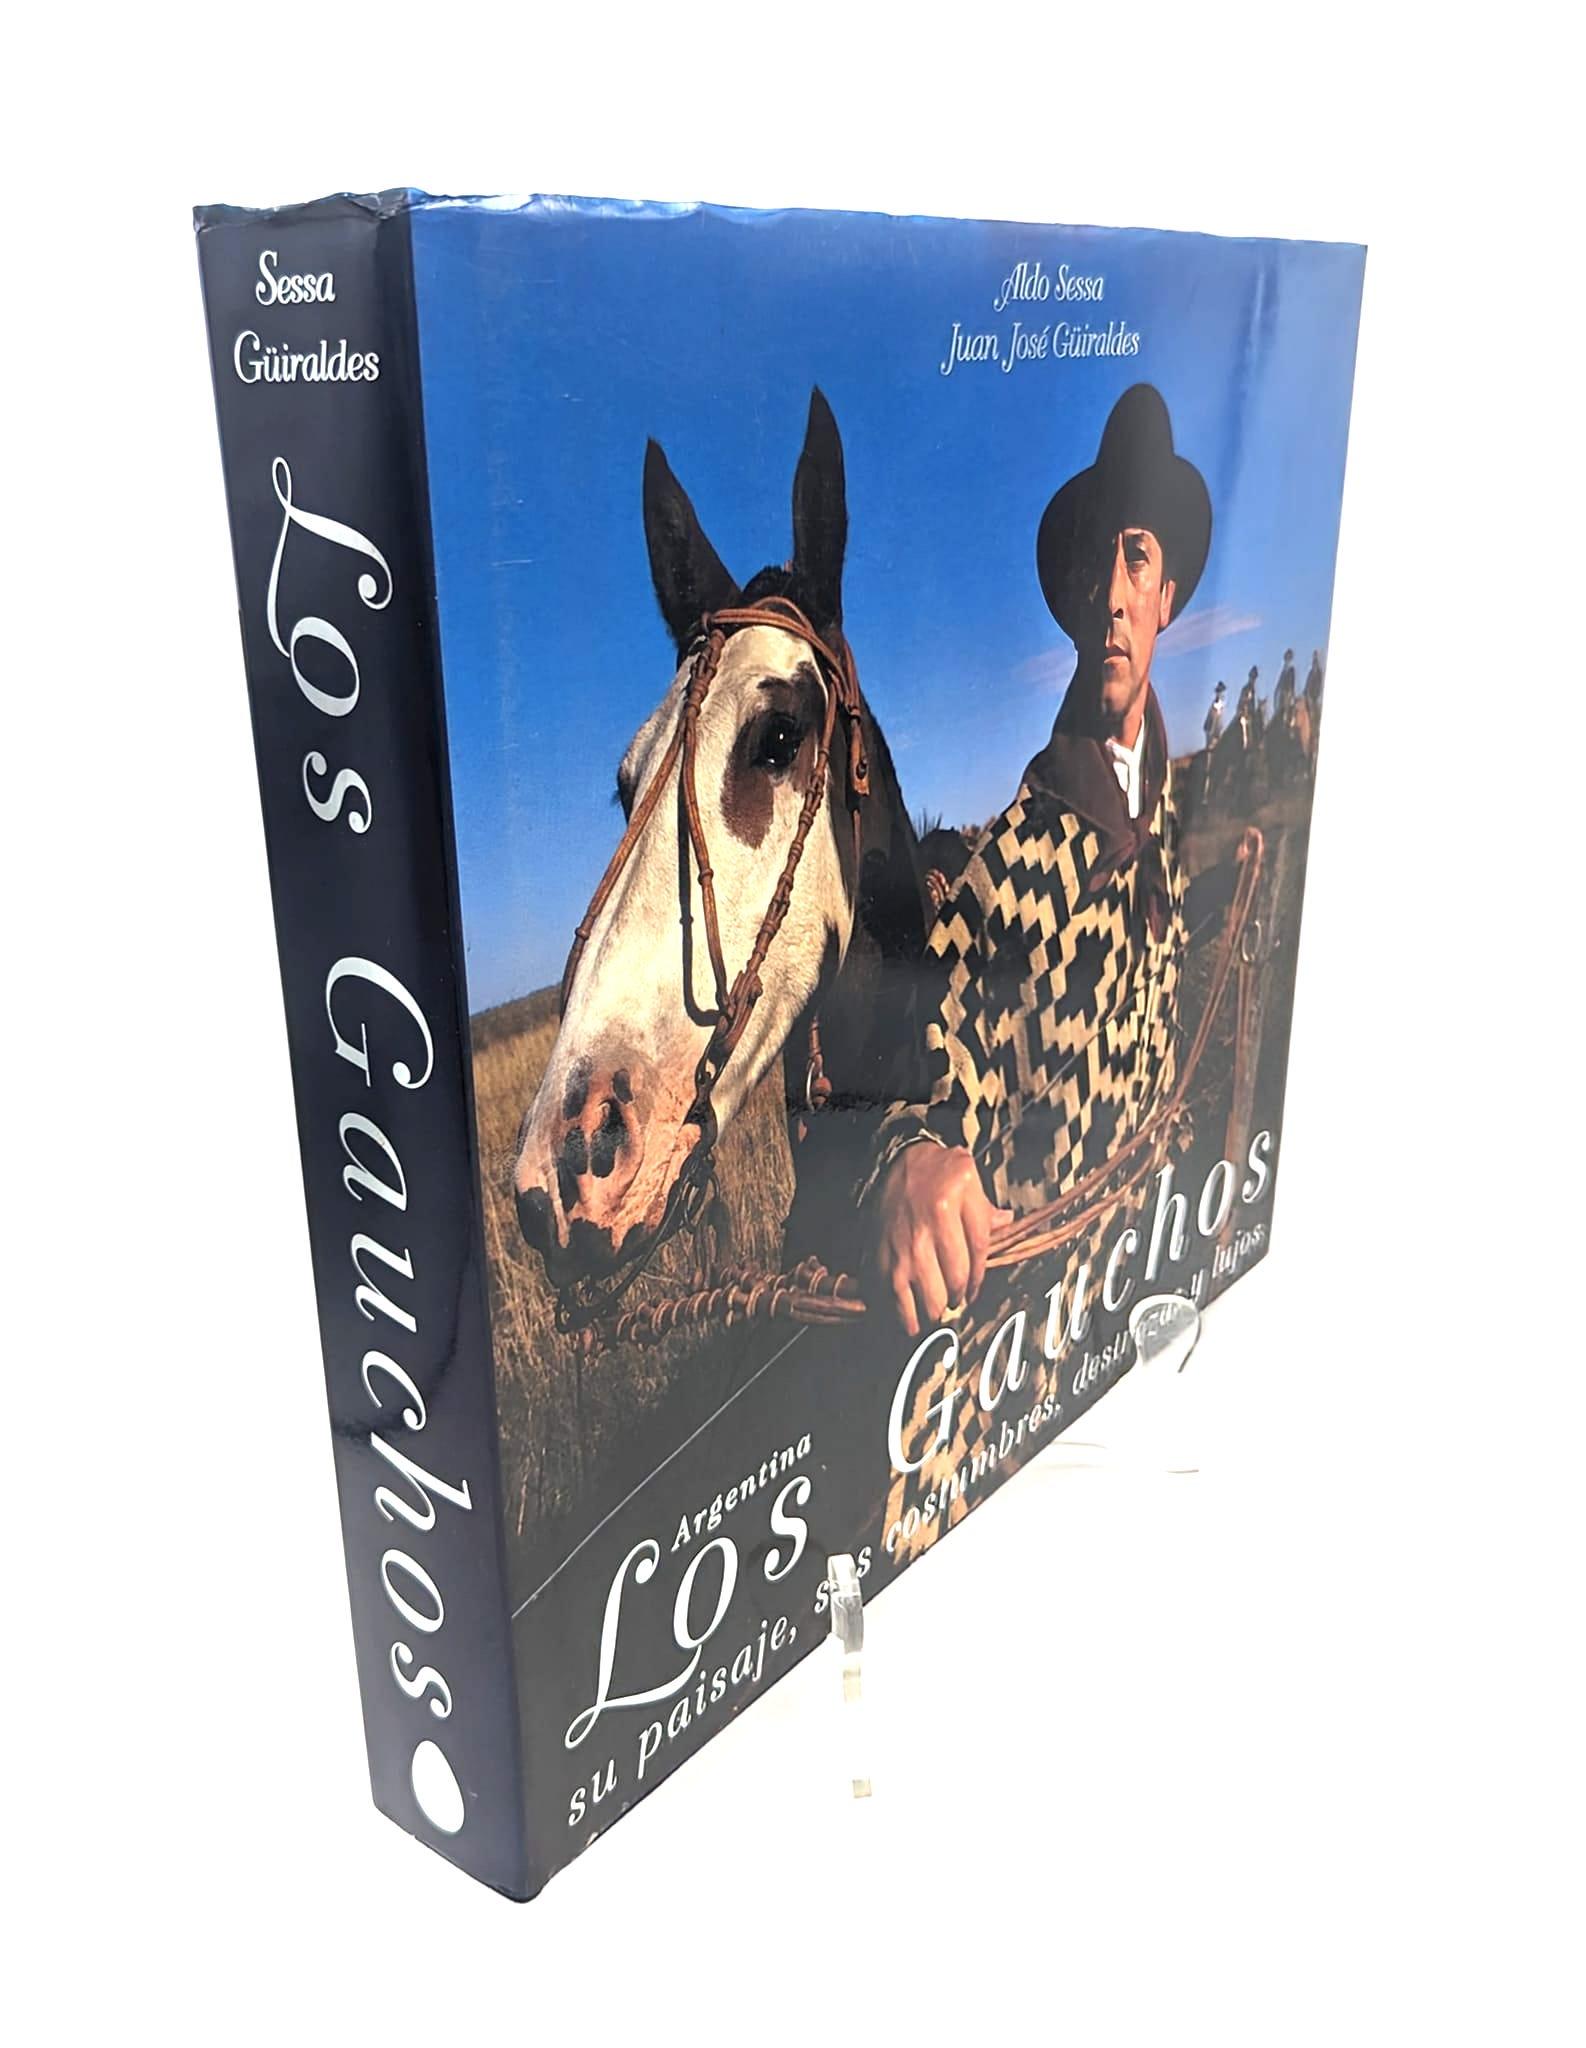 Argentine The Gauchos: Their Landscape, Customs, Skills, and Luxuries, by Aldo Sessa For Sale